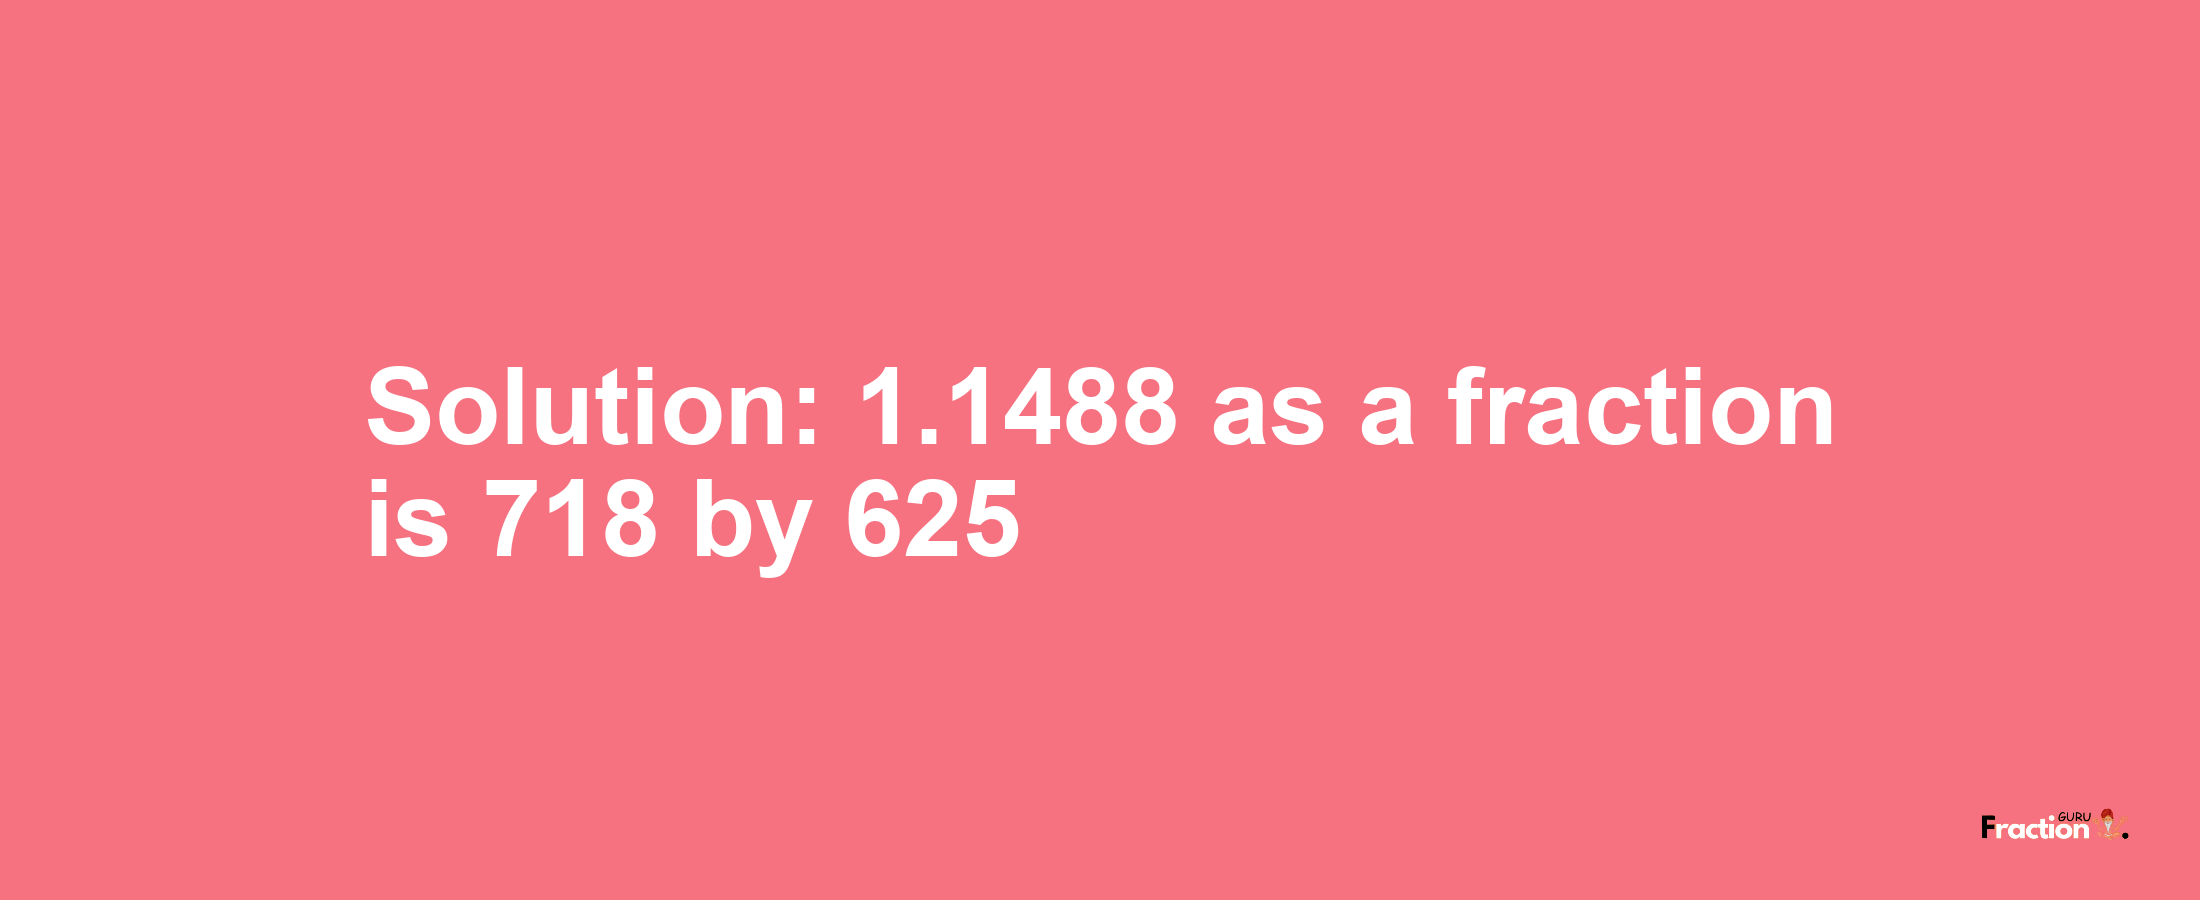 Solution:1.1488 as a fraction is 718/625